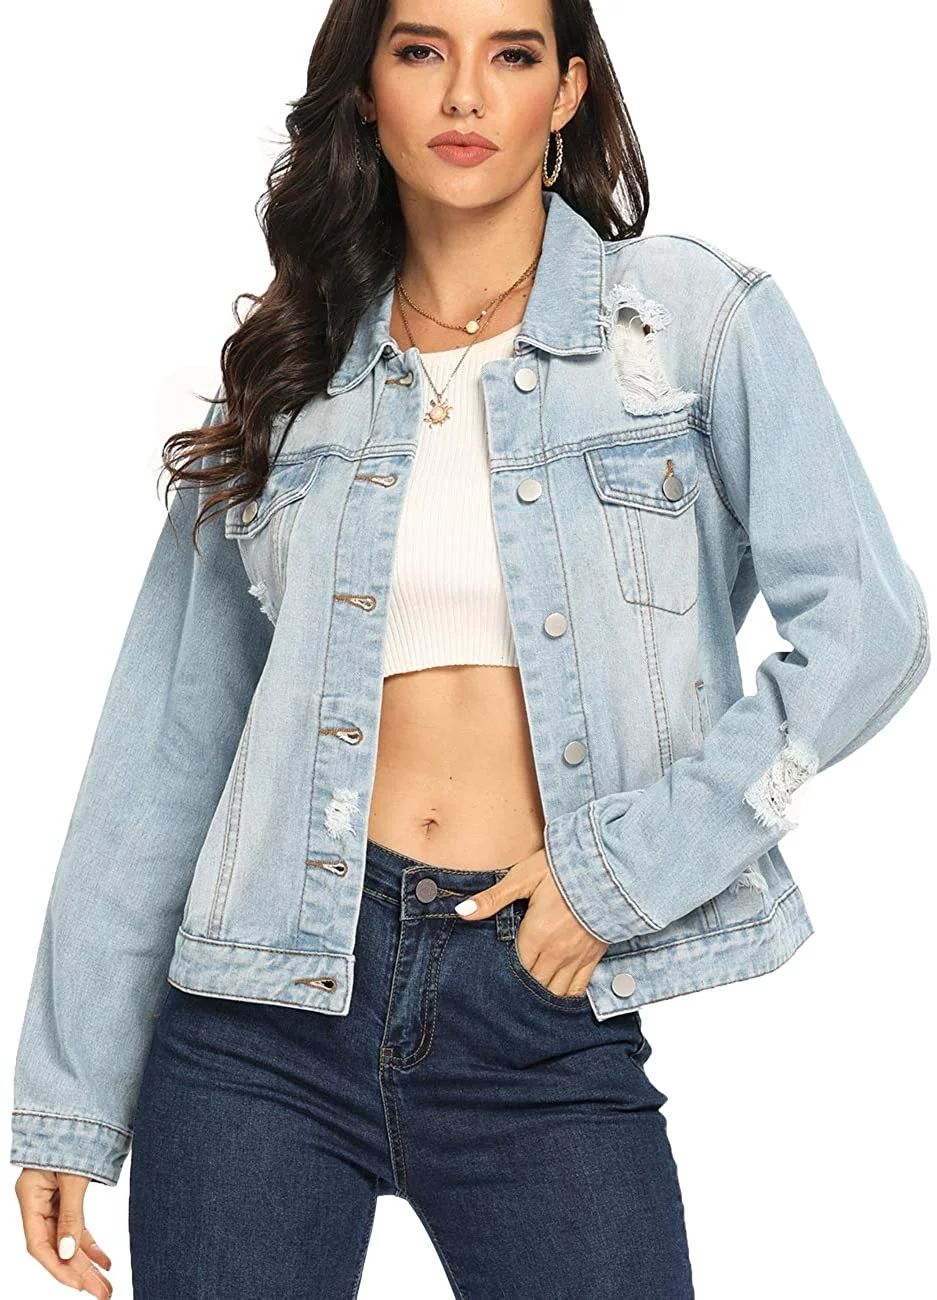 MISS MOLY Women's Ripped Distressed Casual Long Sleeve Basic Button Down Denim Jean Jacket XS | Walmart (US)